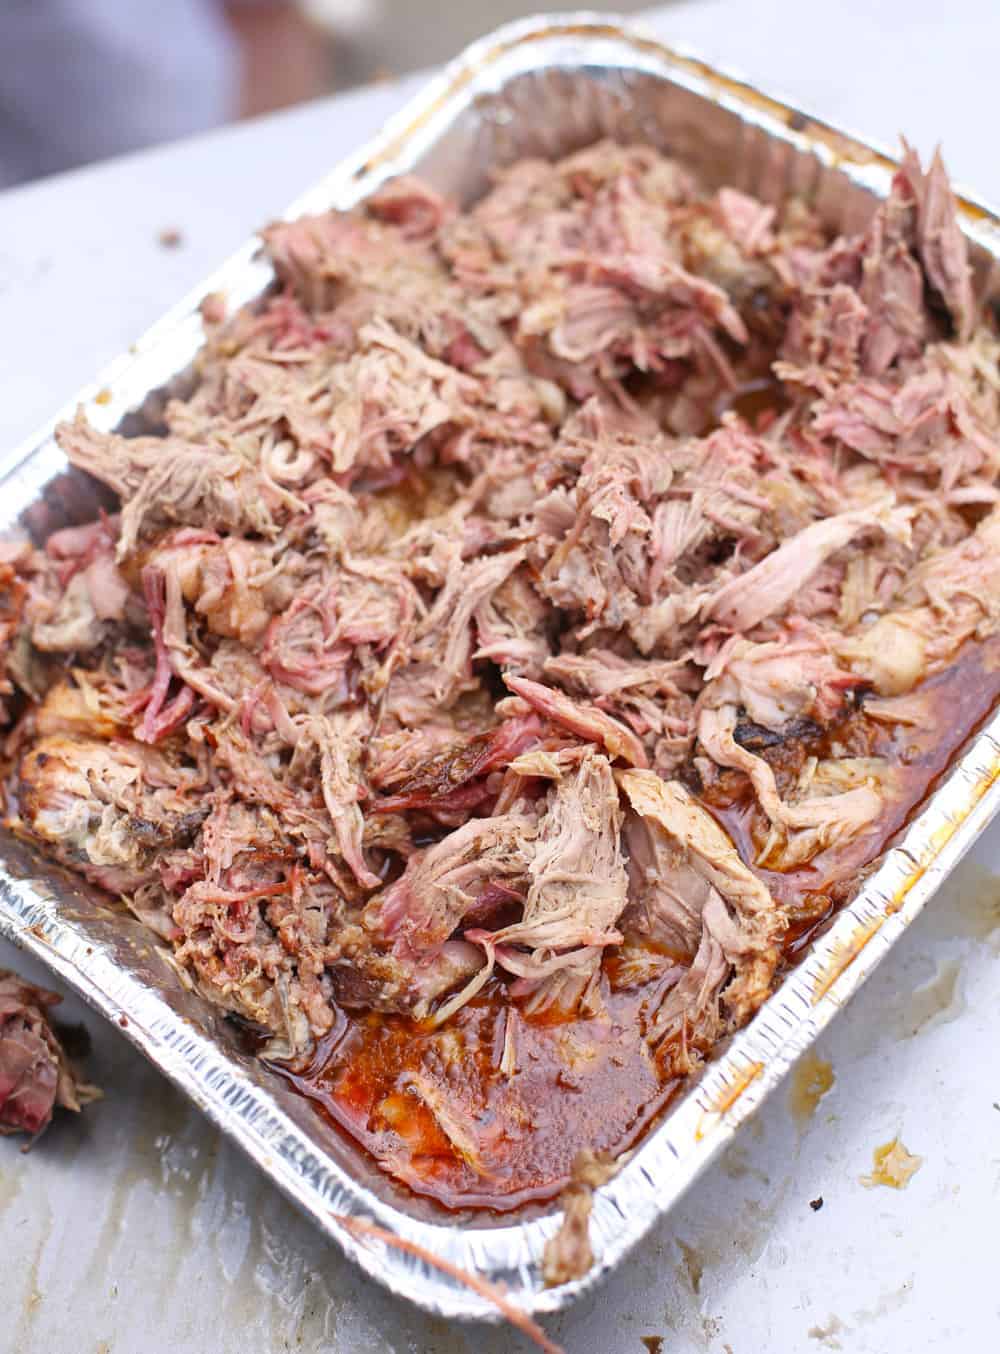 Perfect Pulled Pork made from Smoked Pork Butt (Pork Shoulder)